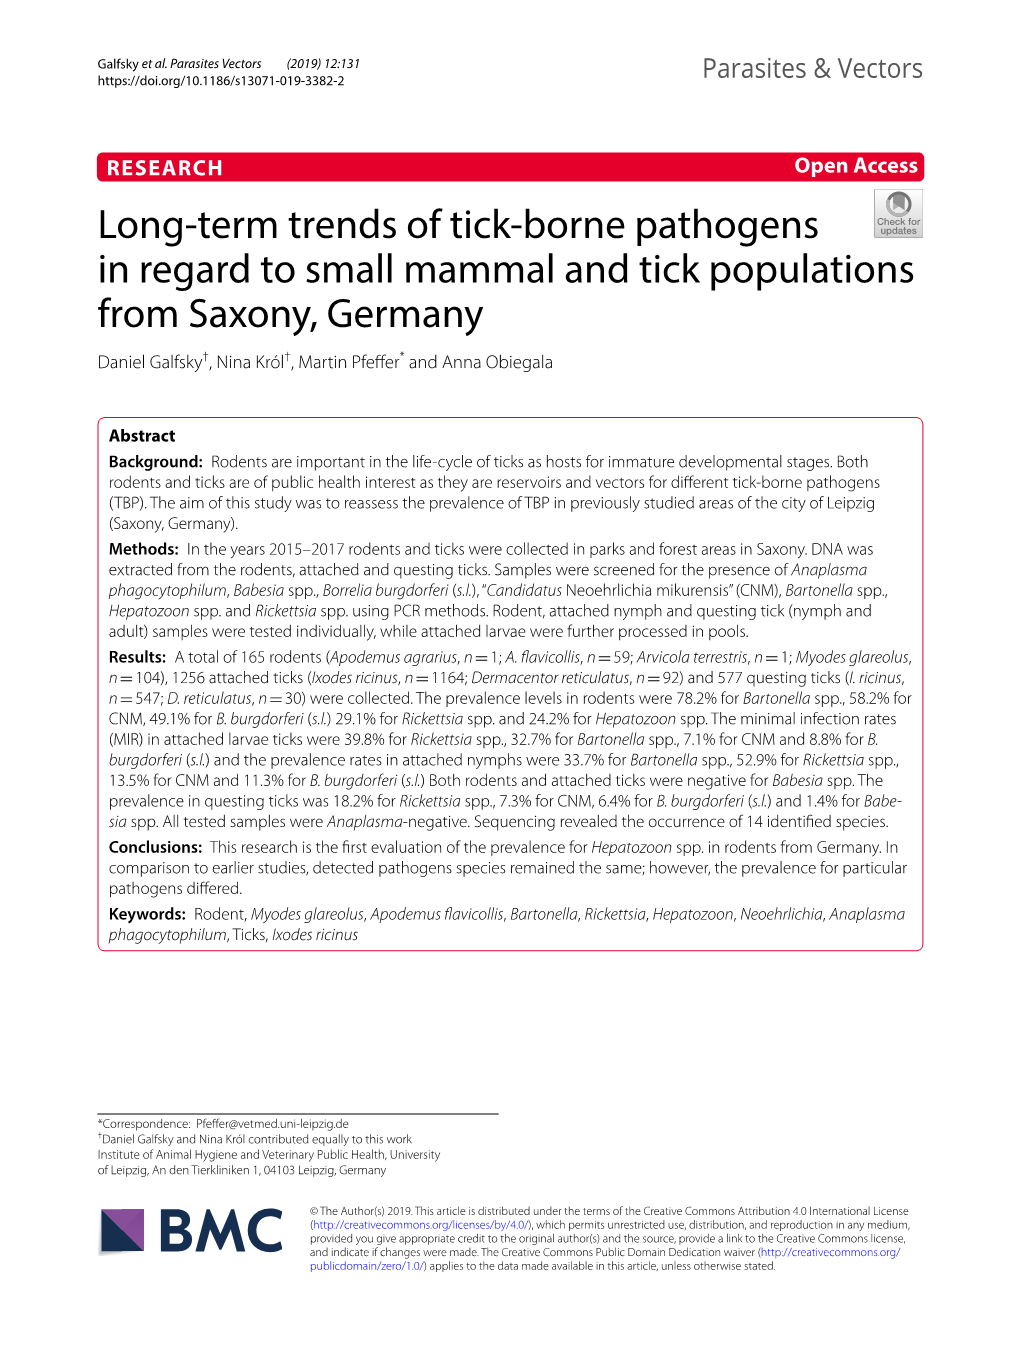 Long-Term Trends of Tick-Borne Pathogens in Regard to Small